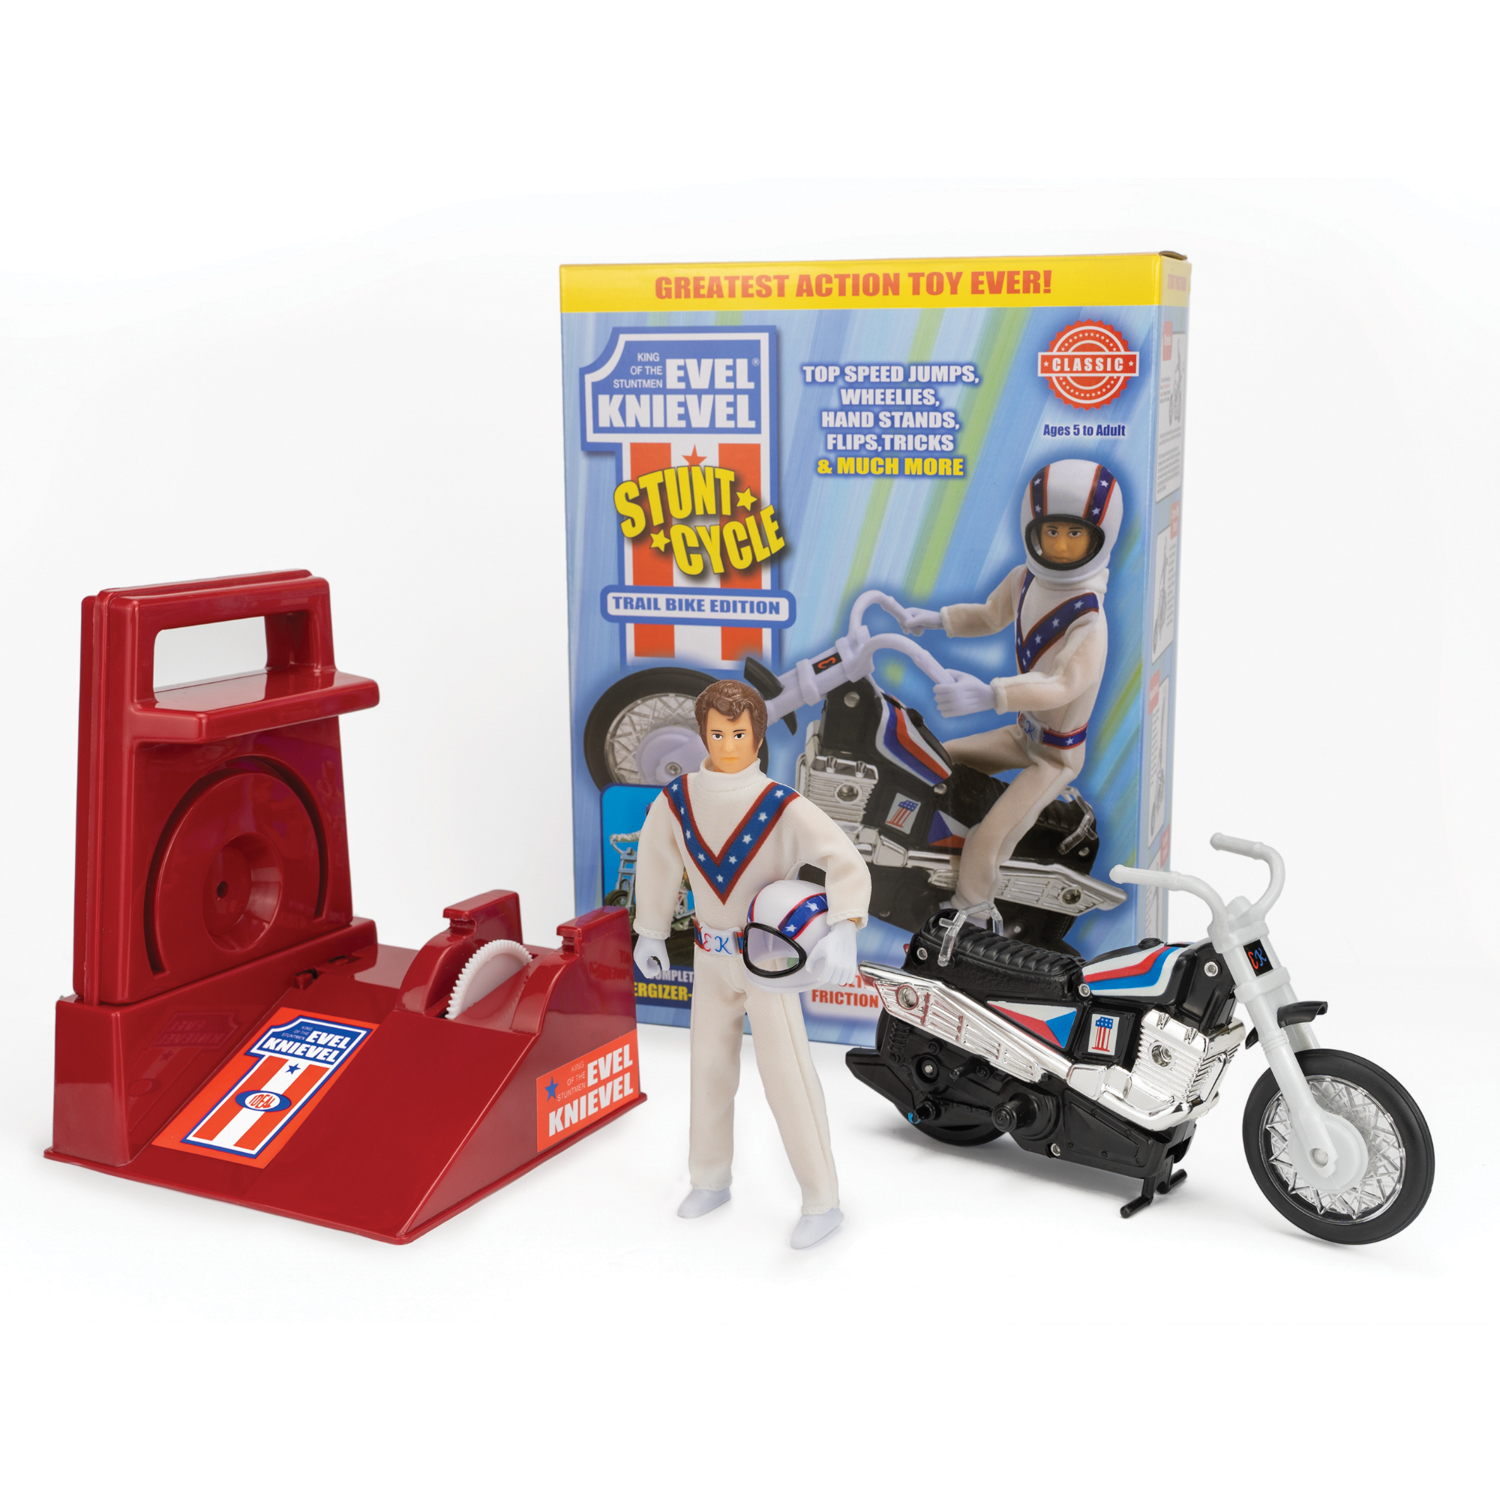 Evel Knievel Stunt Cycle: Ultimate Action Toy for Jumps, Crashes, Flips 8 Inch Bike 1970's Original - image 1 of 7